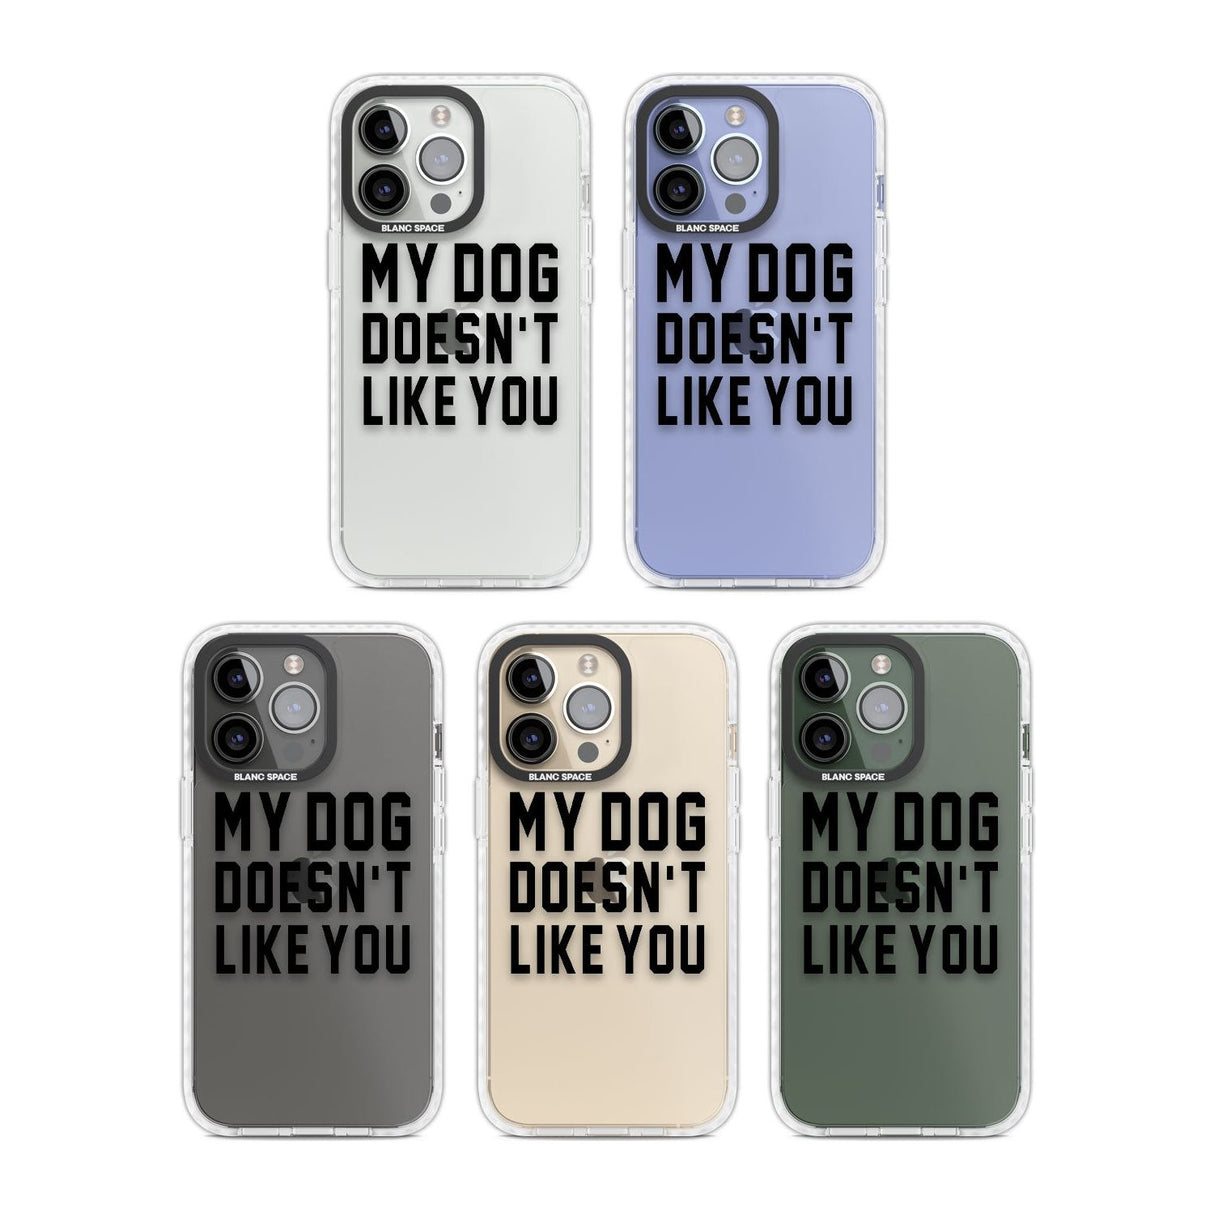 Dog Doesn't Like You Phone Case iPhone 15 Pro Max / Black Impact Case,iPhone 15 Plus / Black Impact Case,iPhone 15 Pro / Black Impact Case,iPhone 15 / Black Impact Case,iPhone 15 Pro Max / Impact Case,iPhone 15 Plus / Impact Case,iPhone 15 Pro / Impact Case,iPhone 15 / Impact Case,iPhone 15 Pro Max / Magsafe Black Impact Case,iPhone 15 Plus / Magsafe Black Impact Case,iPhone 15 Pro / Magsafe Black Impact Case,iPhone 15 / Magsafe Black Impact Case,iPhone 14 Pro Max / Black Impact Case,iPhone 14 Plus / Black 